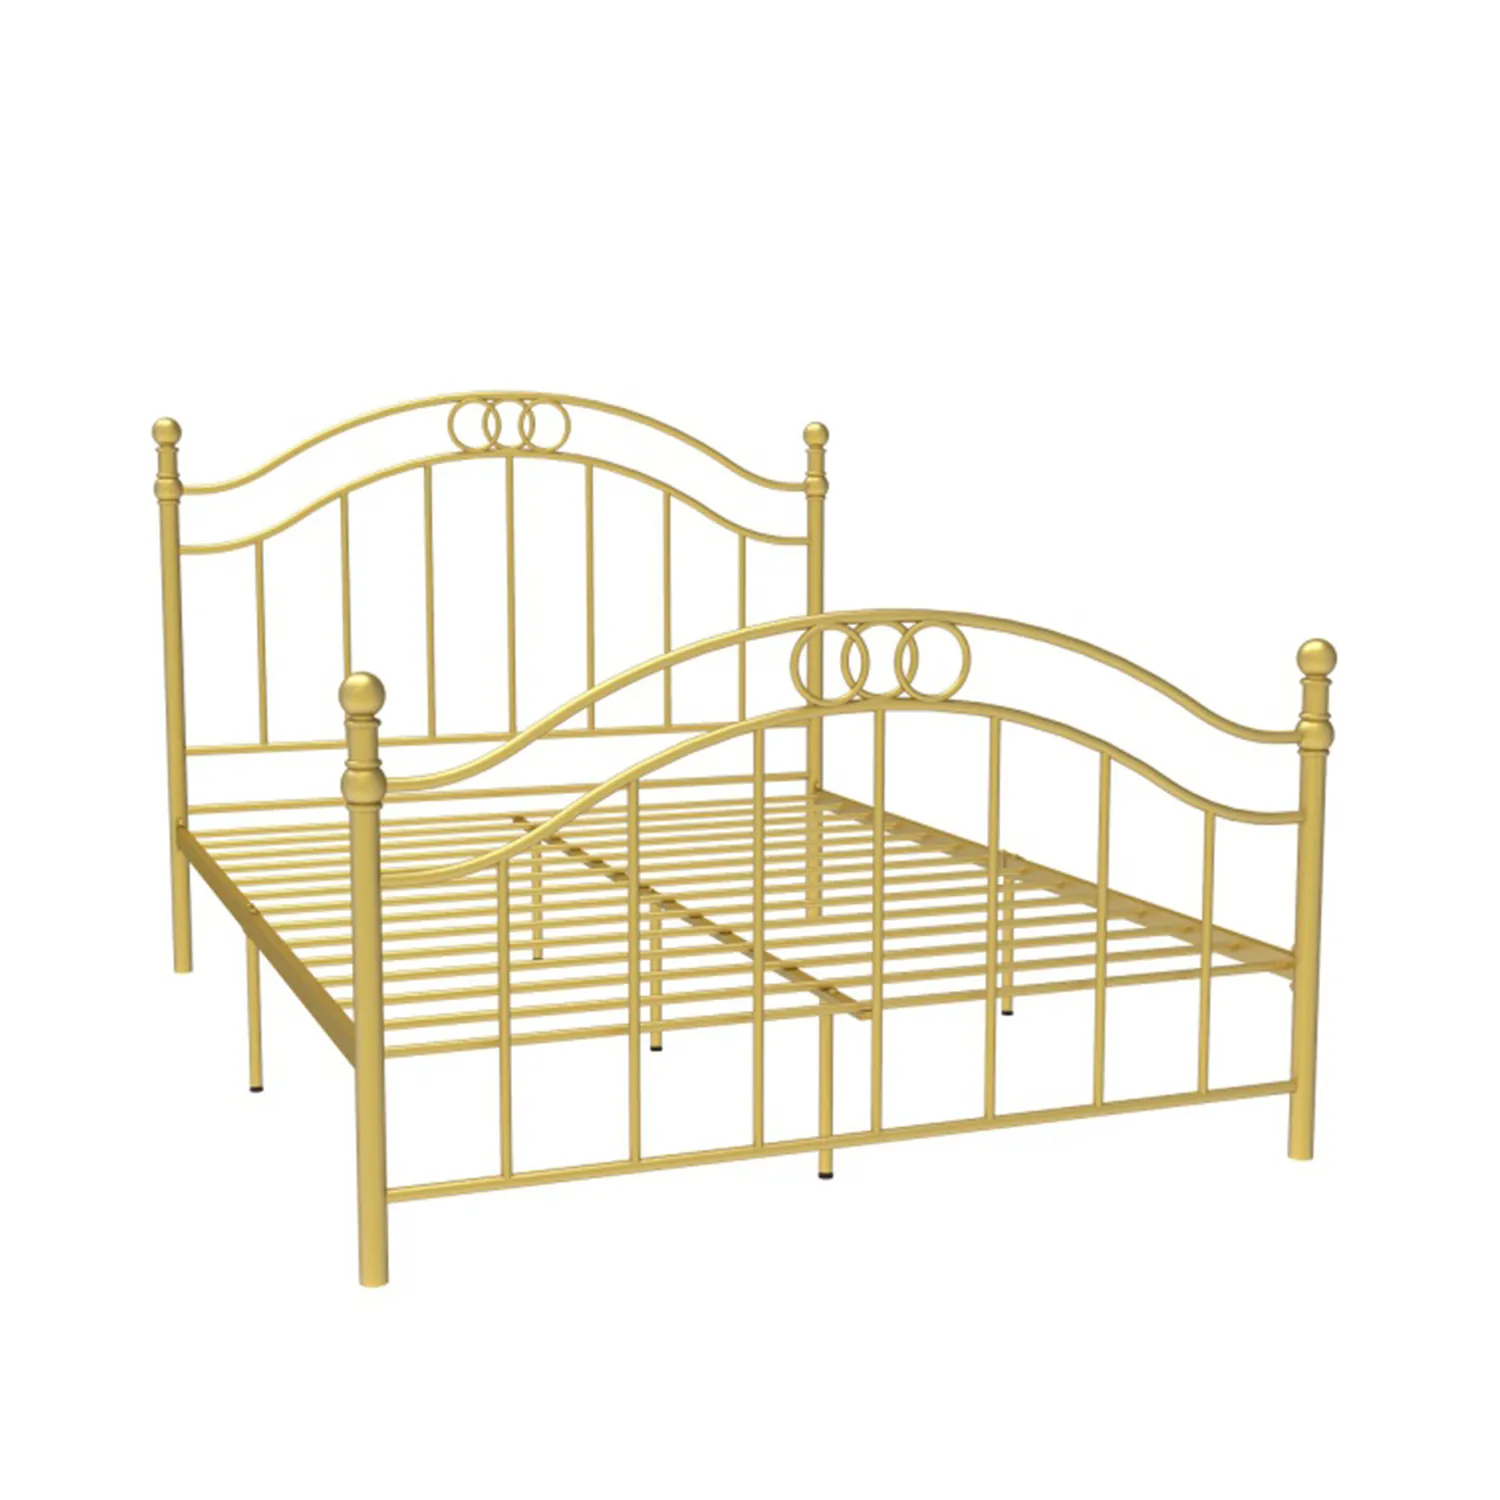 Metallic Beds Vintage Single Double King Full Size White Gold Metal Bed Frame